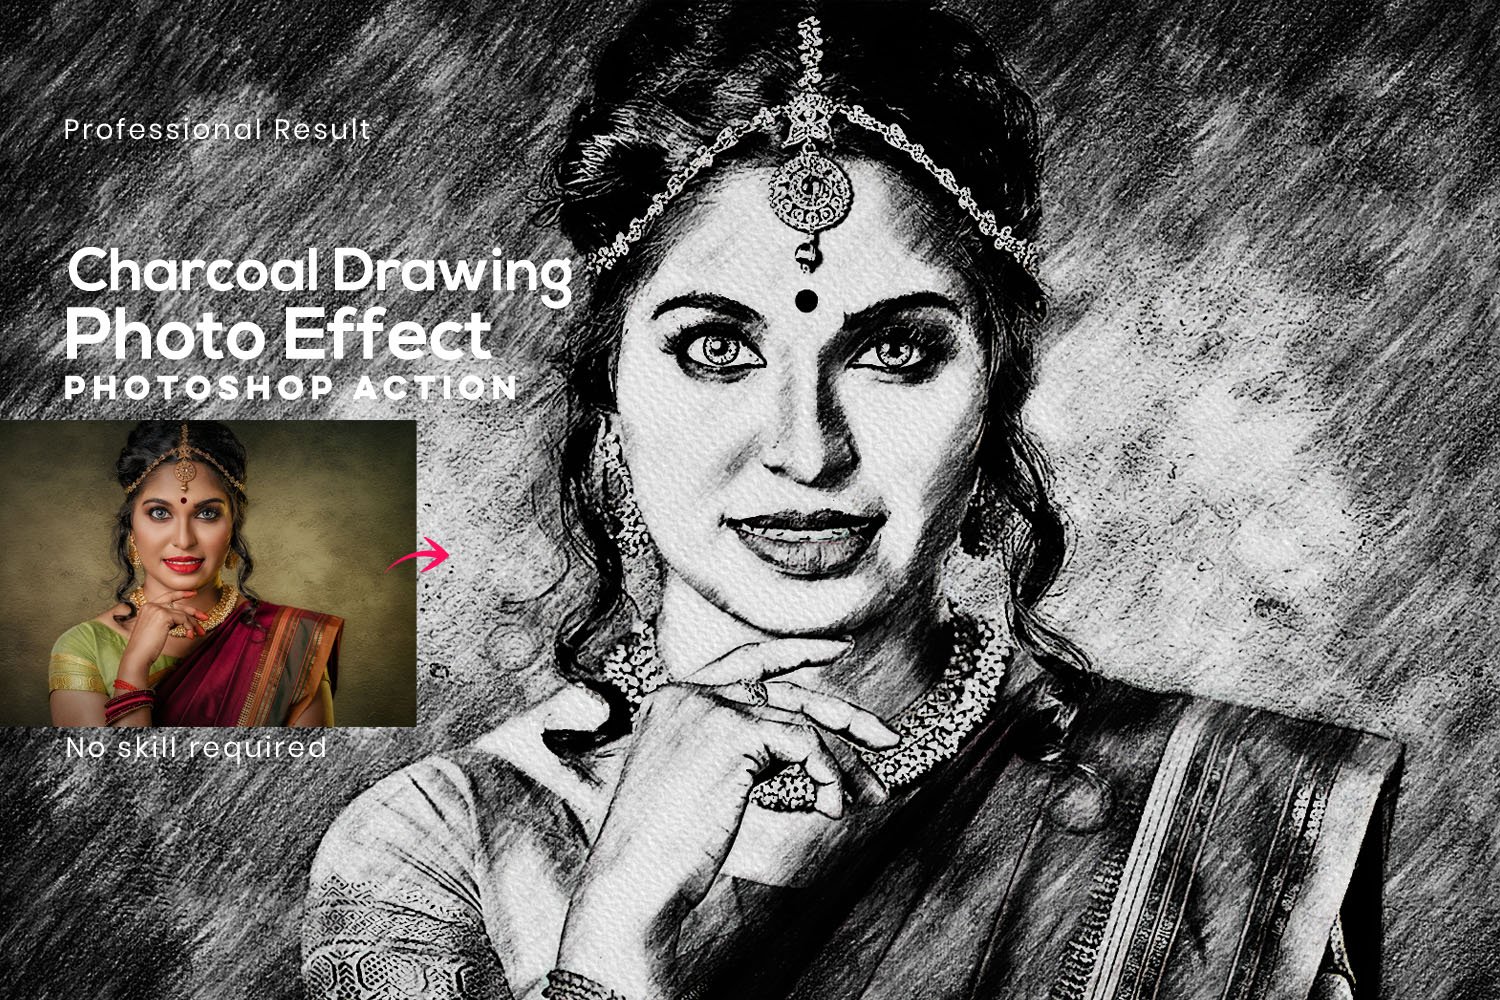 Charcoal Drawing Photoshop Actionpreview image.